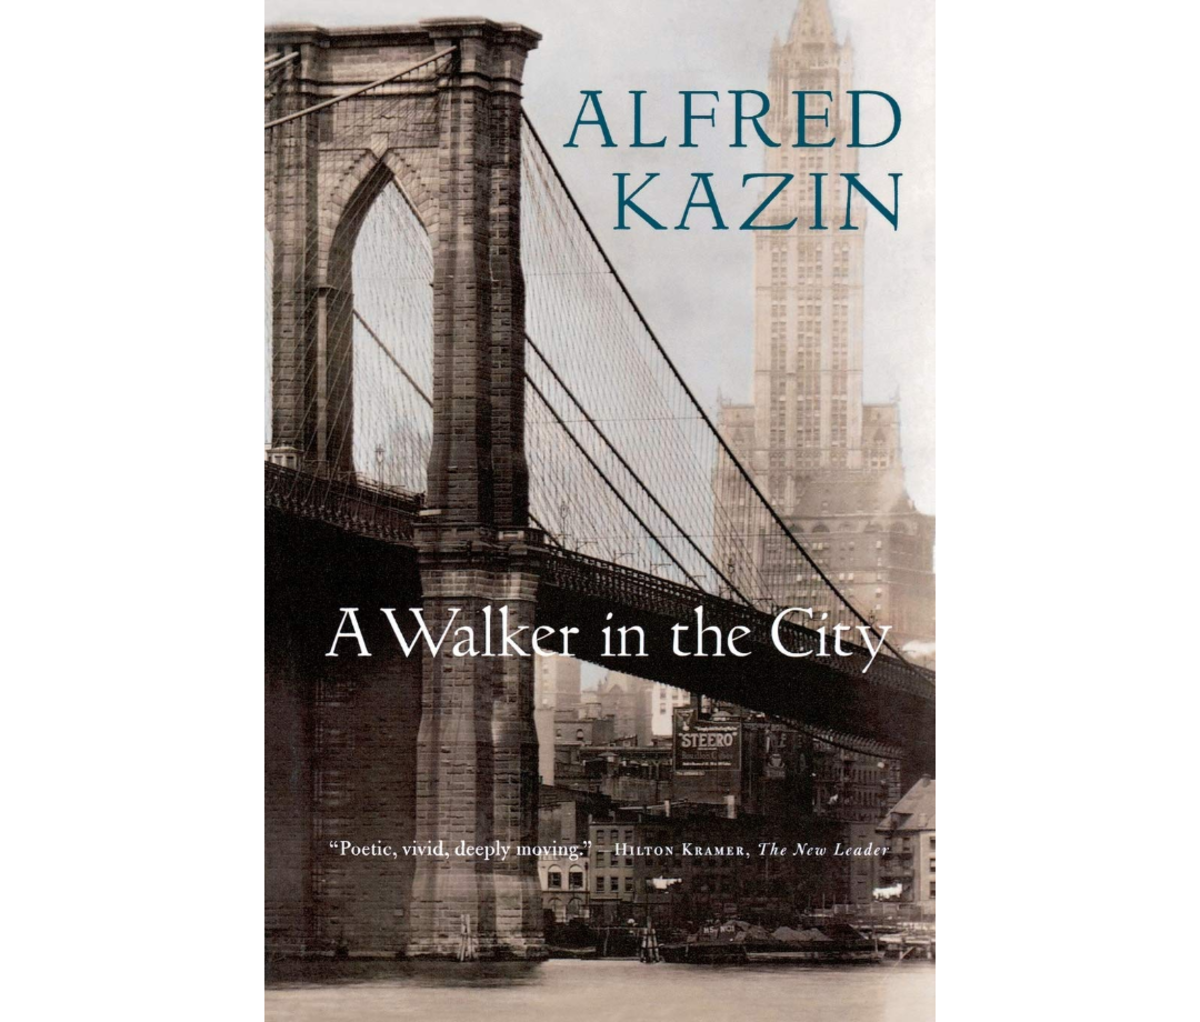 A Walker in the City by Alfred Kazin